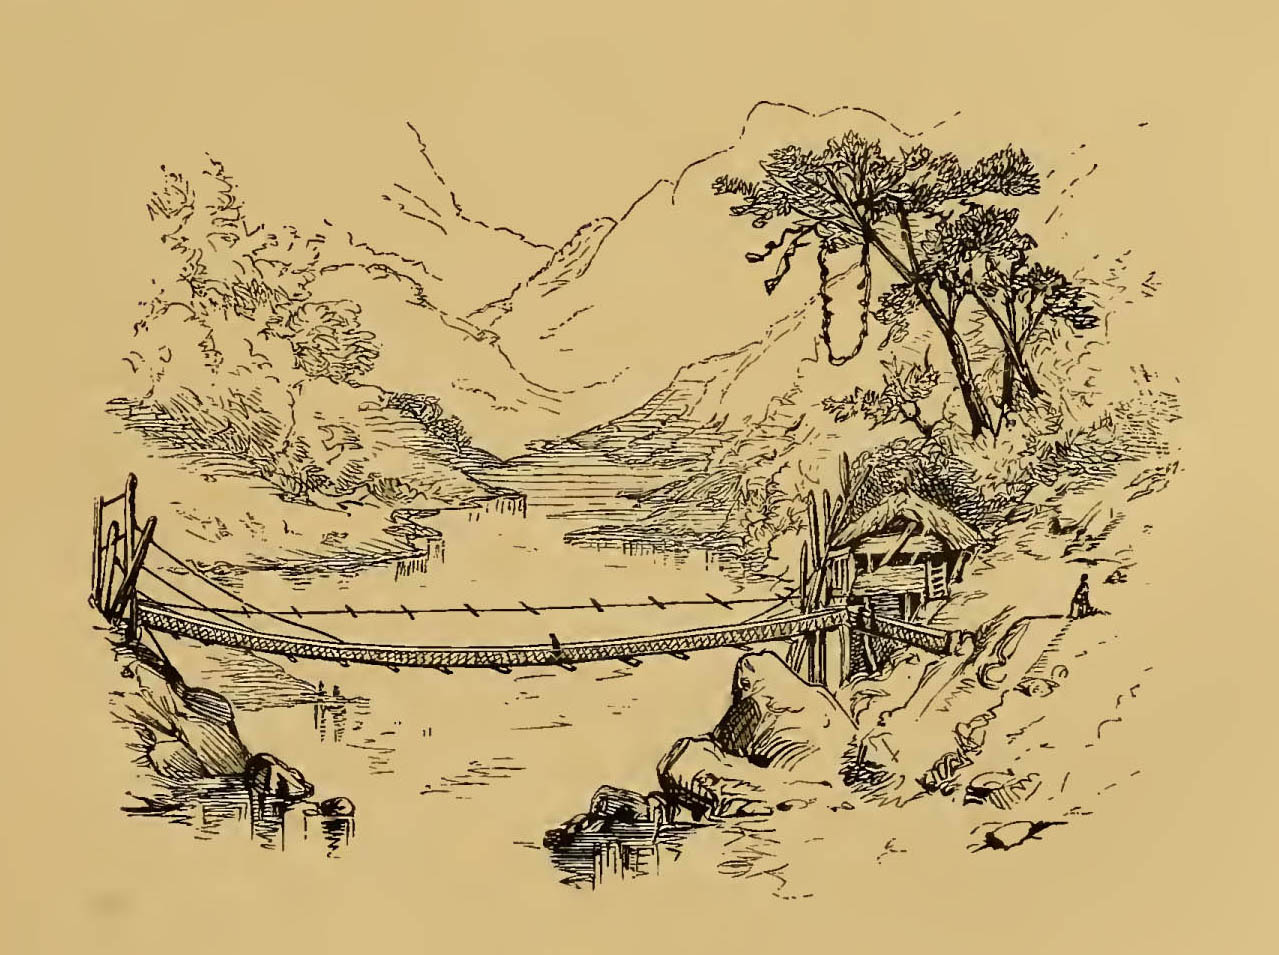 bridge crossing river with mountains in background